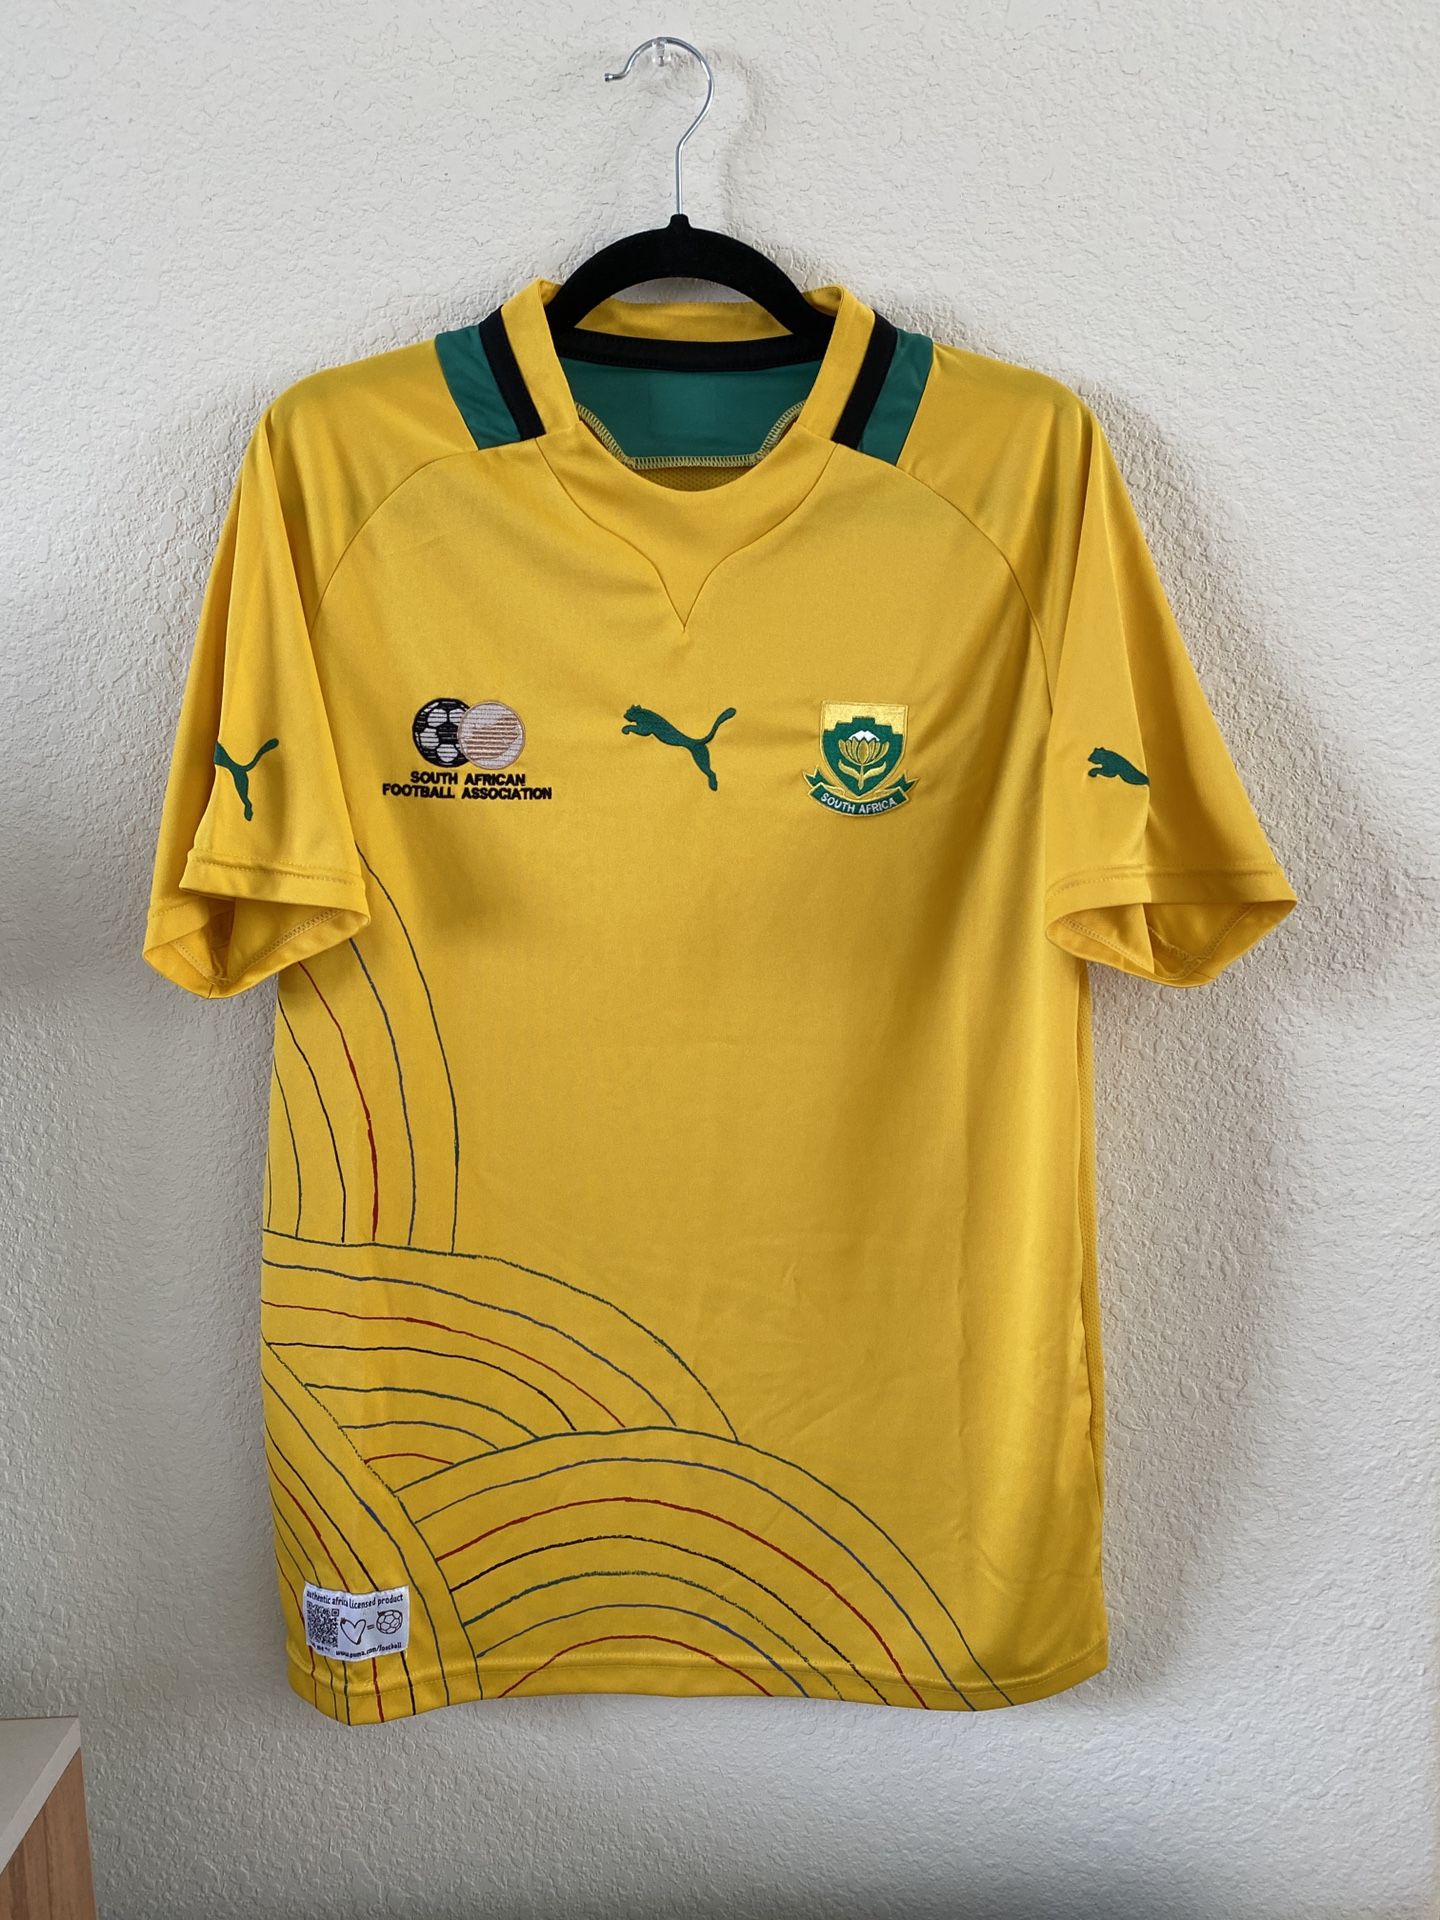 2012/14 South Africa Home Soccer Jersey (Size M) 